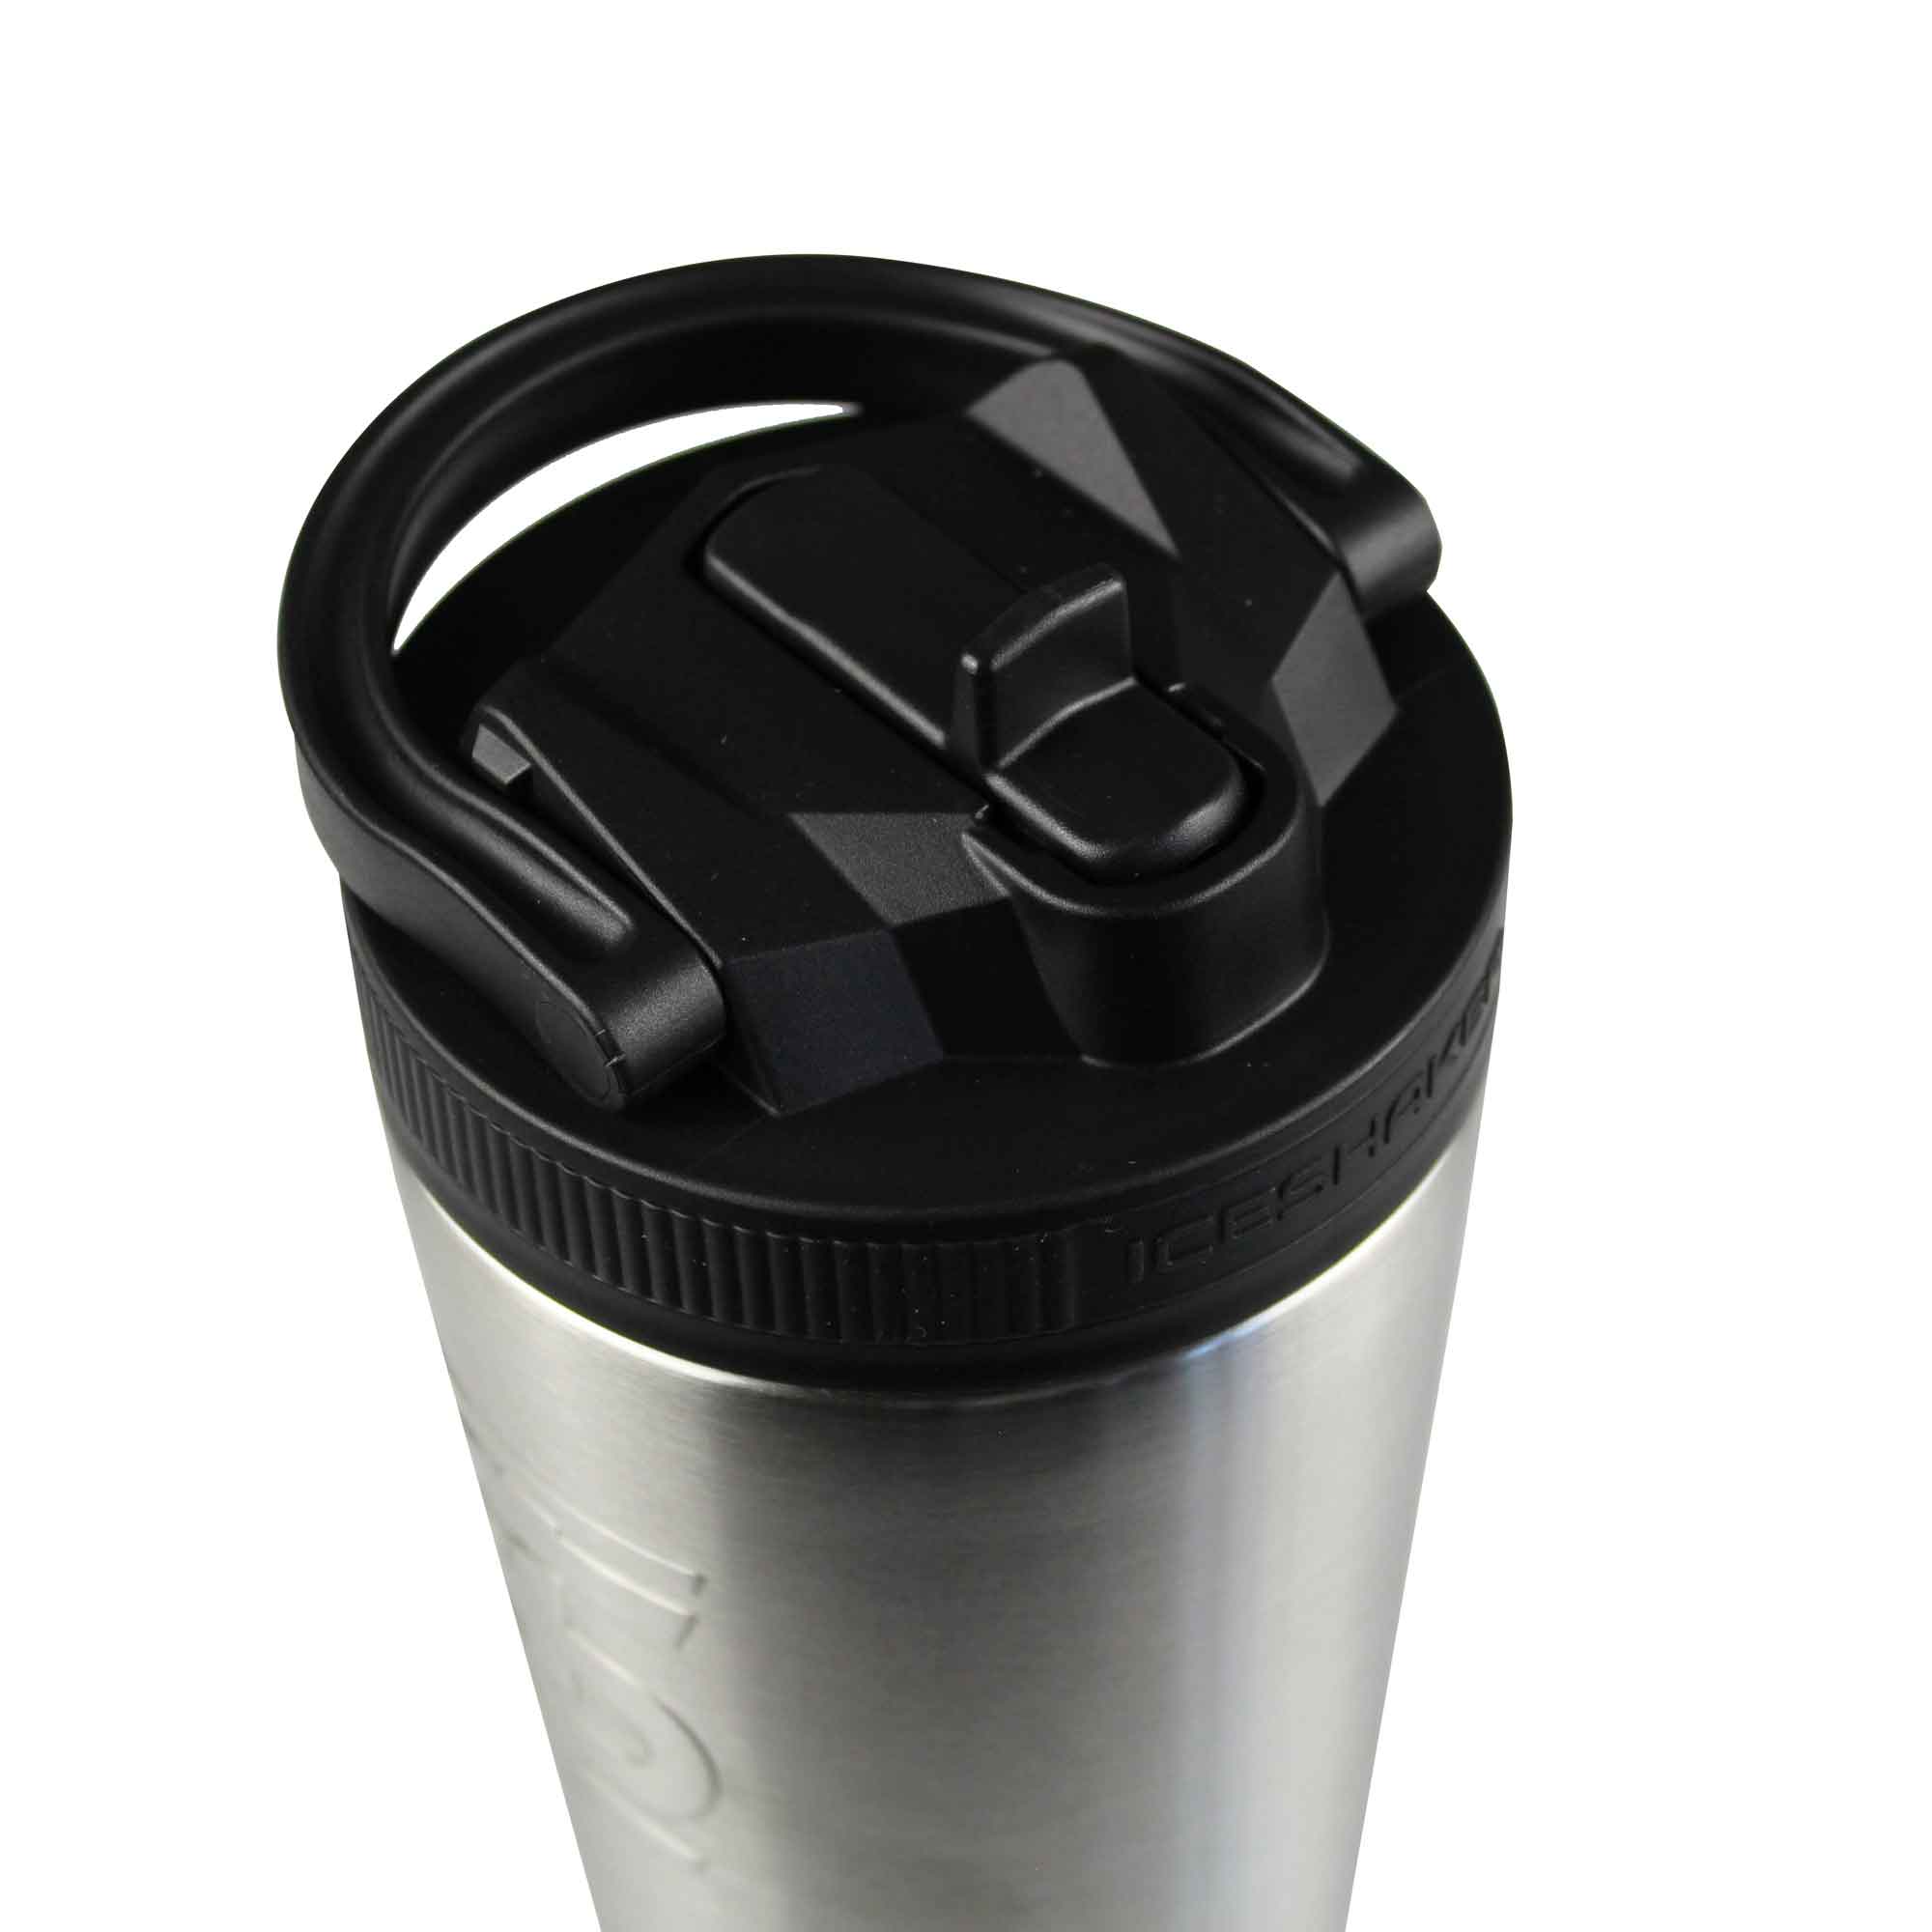 RTIC 16oz Coffee Cup, Stainless Steel & Vacuum Insulated, Multiple Sizes  & Colors (Flamingo, Matte), Size: 16oz